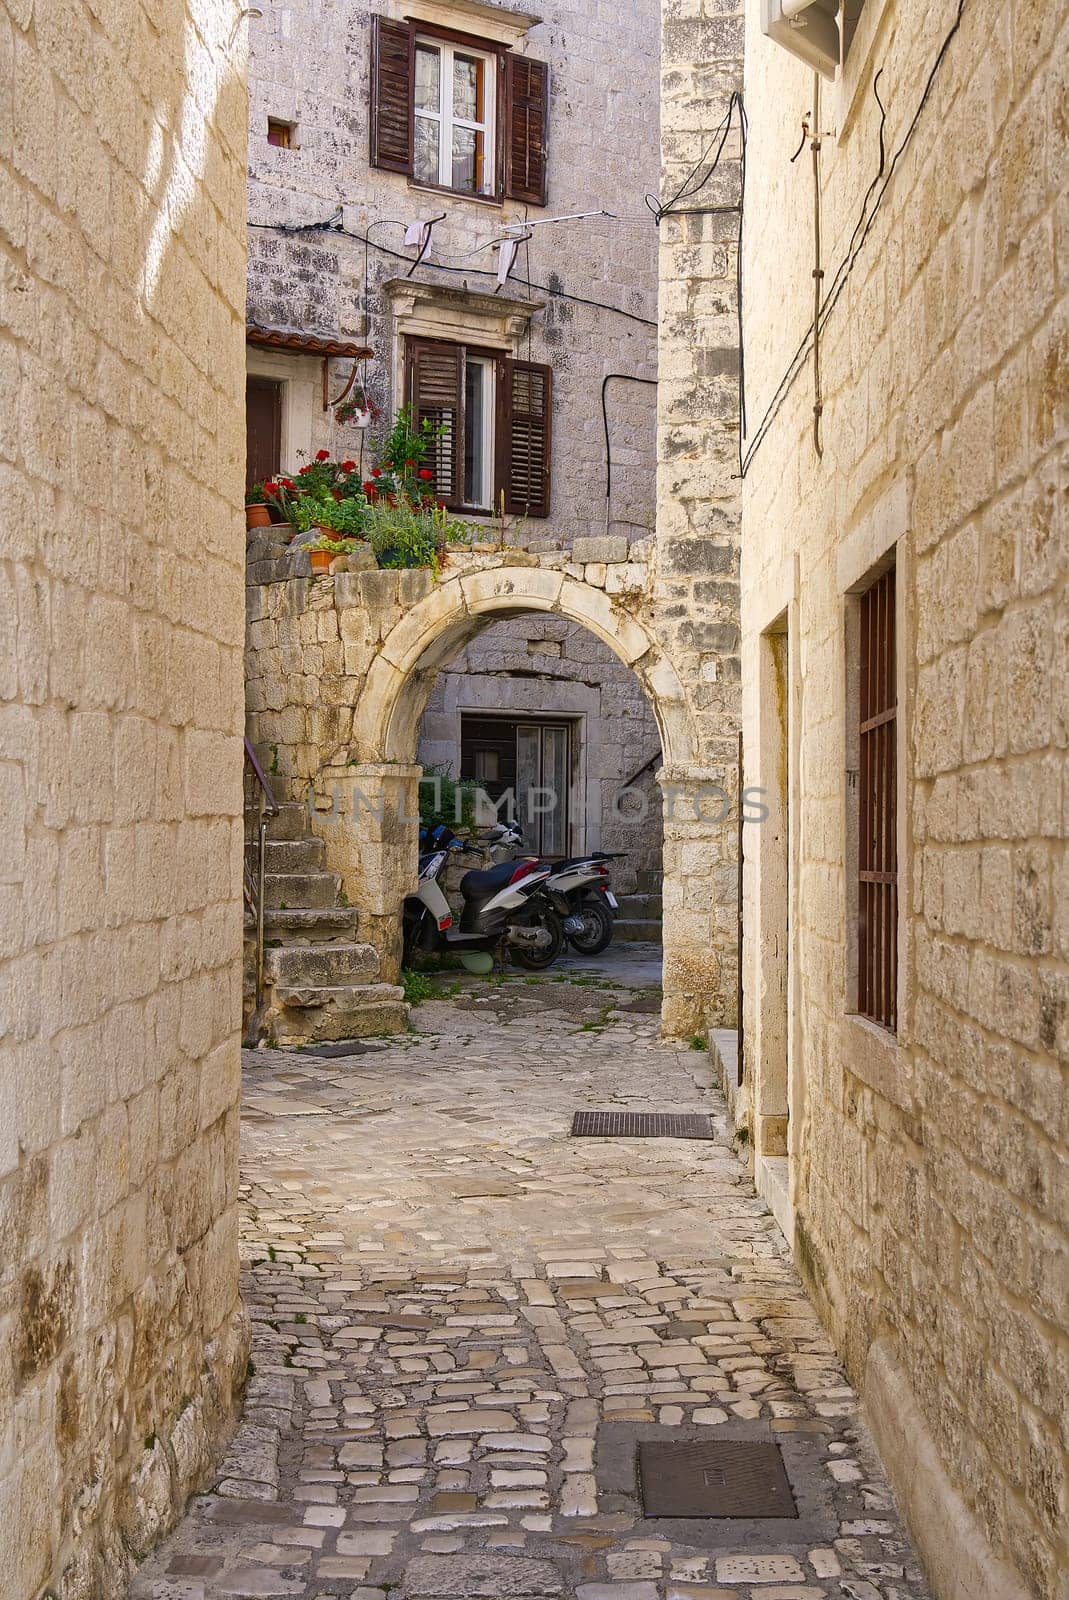 Narrow street with stone houses. Old houses and old narrow alley in Trogir, Croatia, Europe. Streets in old town.